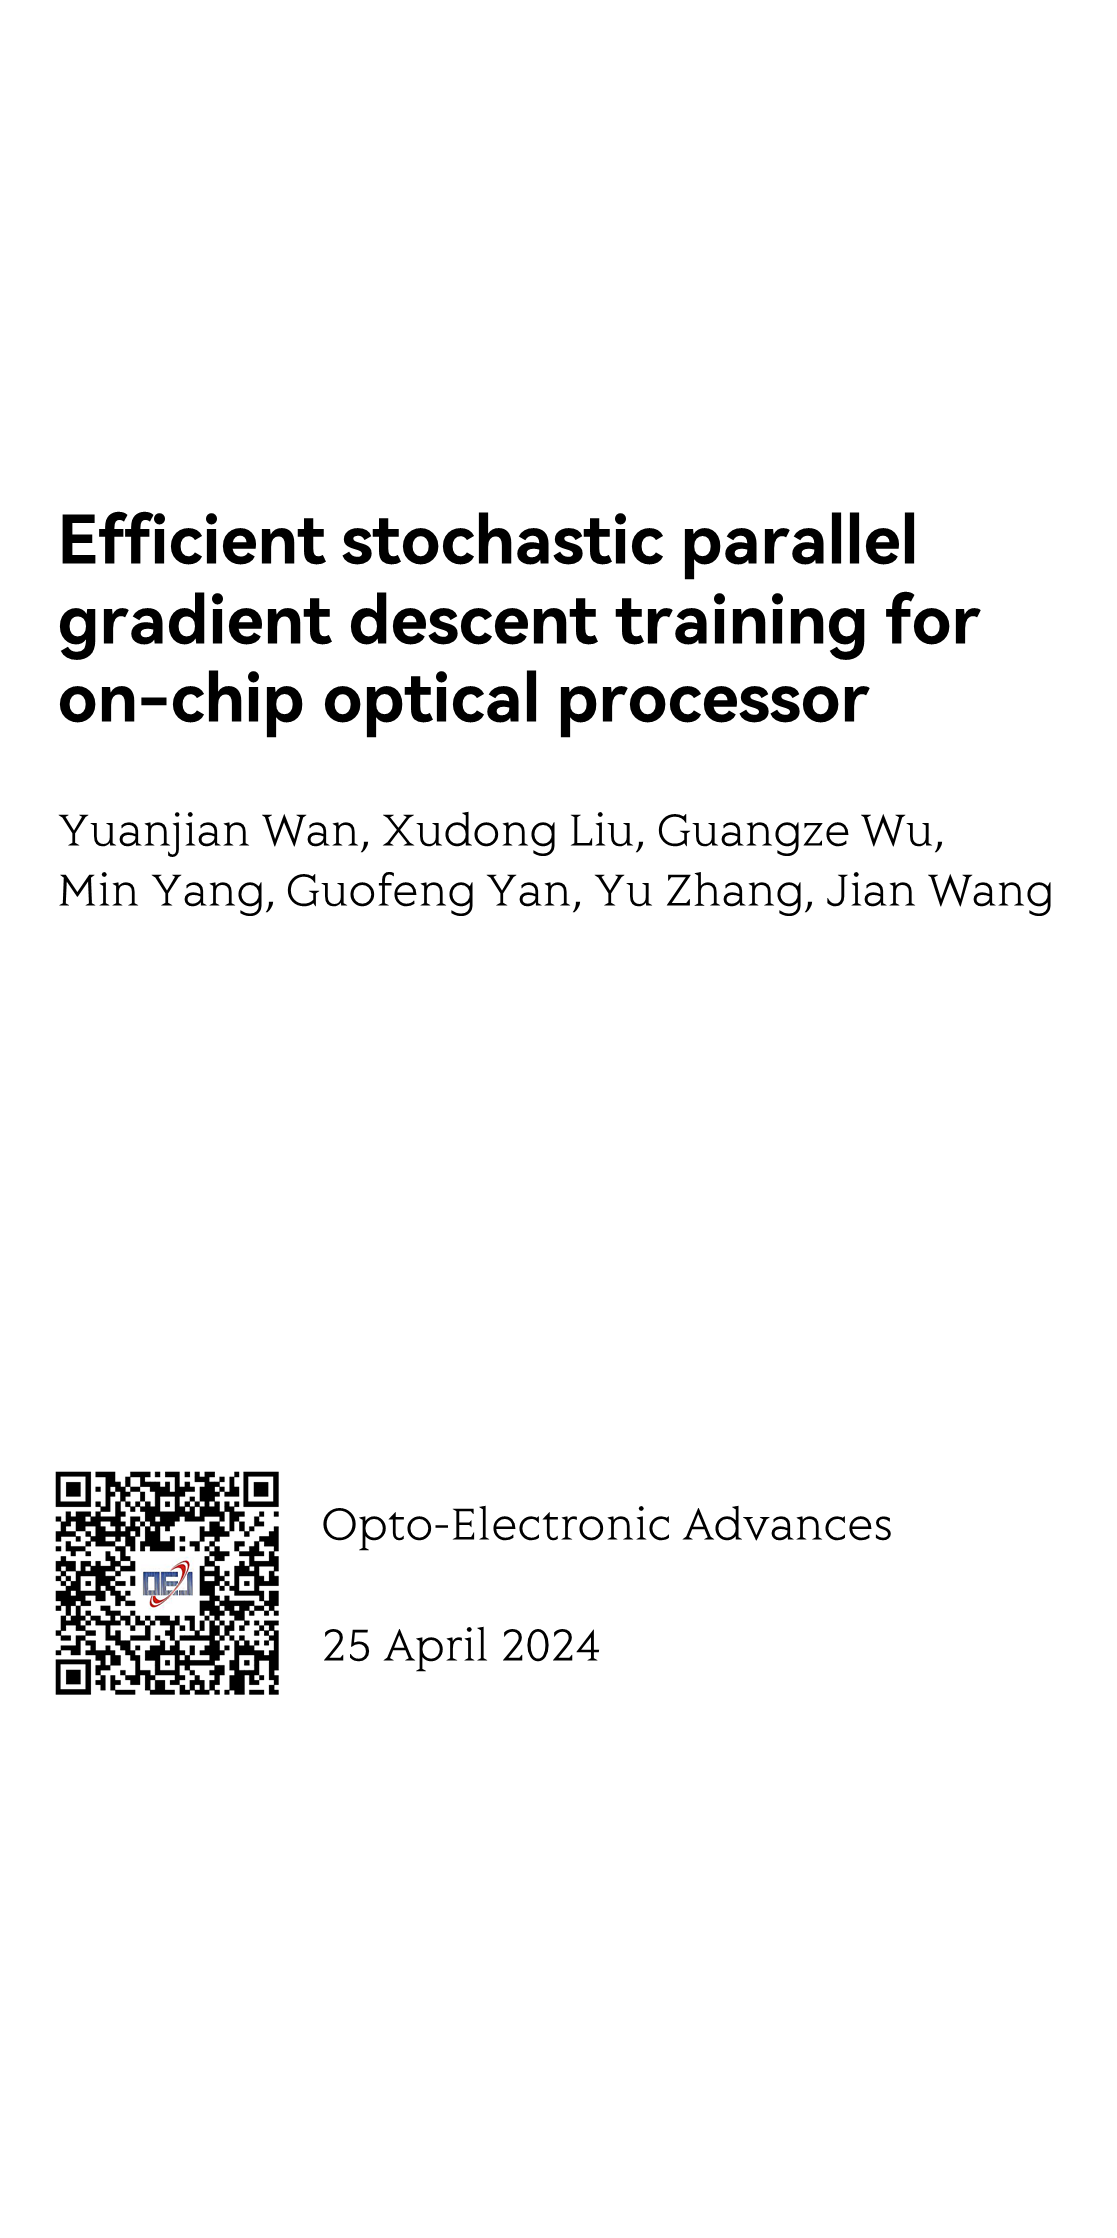 Efficient stochastic parallel gradient descent training for on-chip optical processor_1